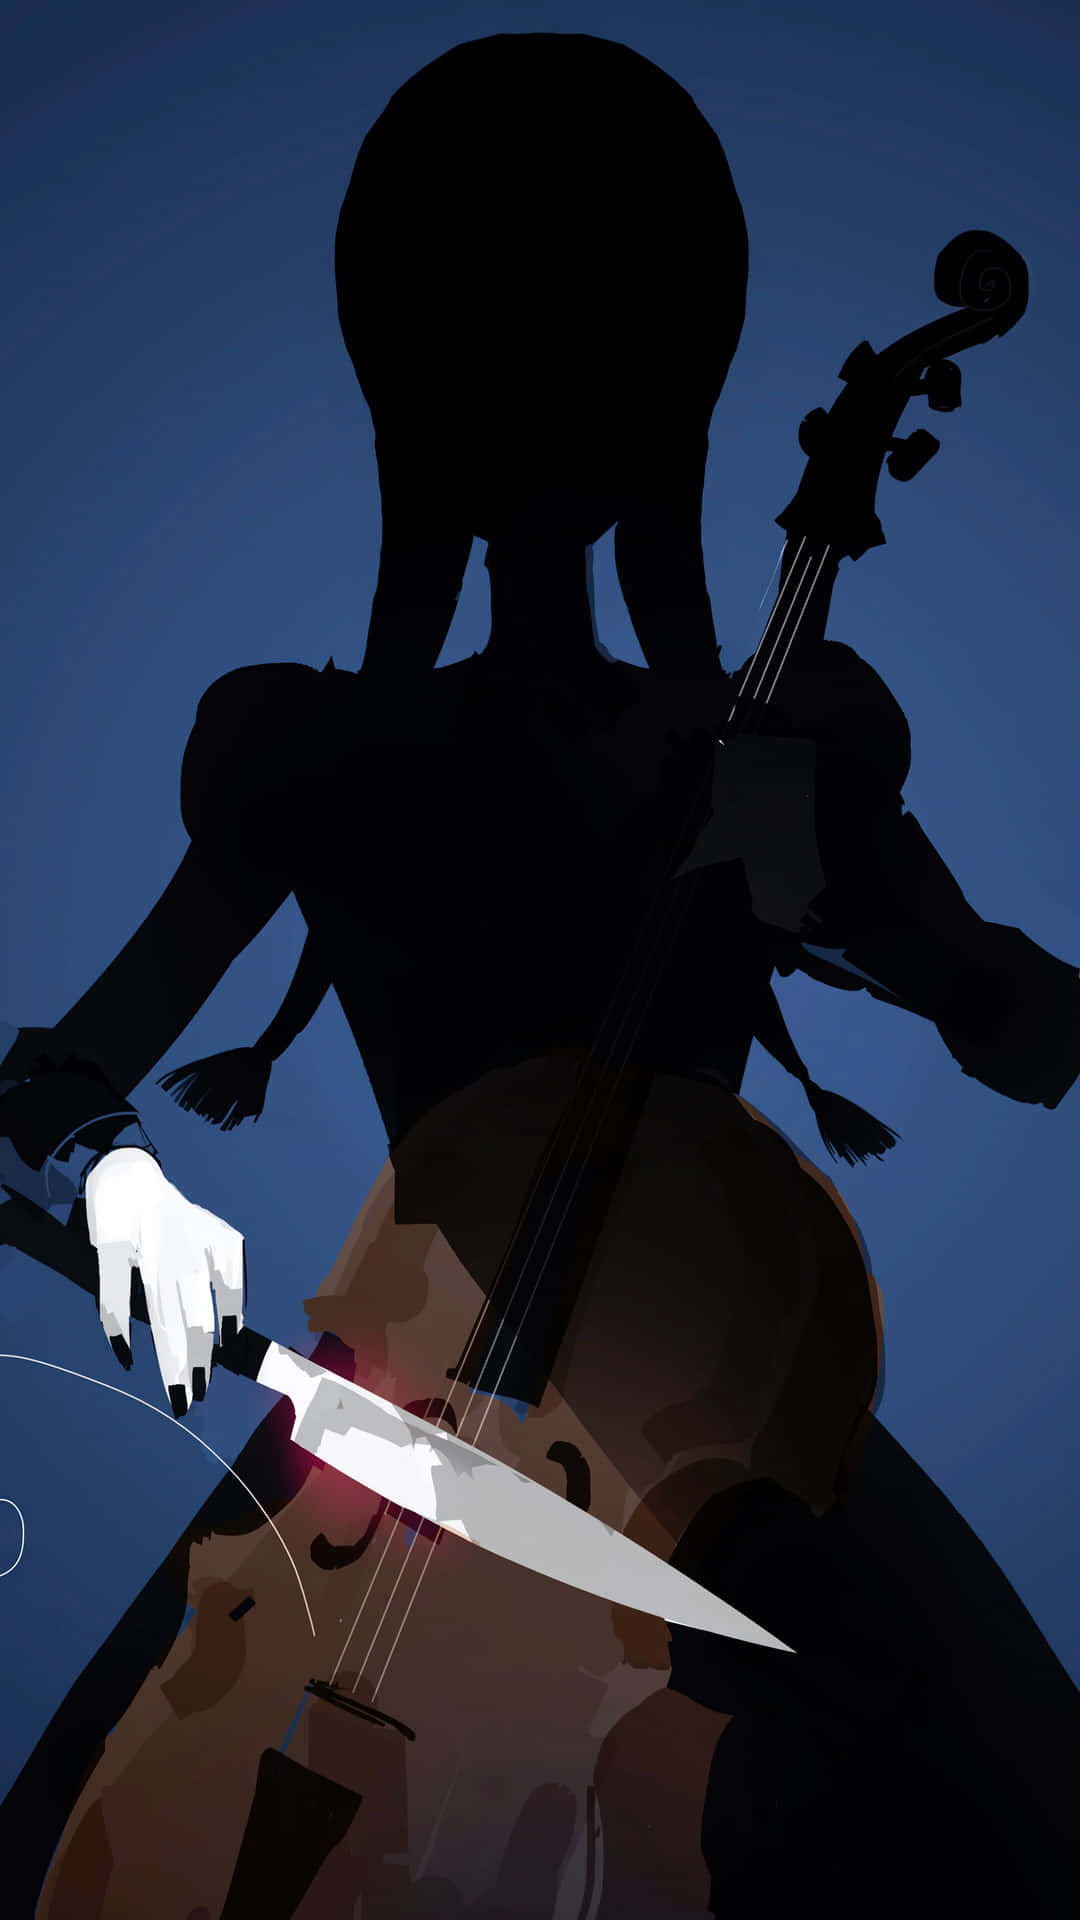 Silhouette Violinist Playing Music Wallpaper